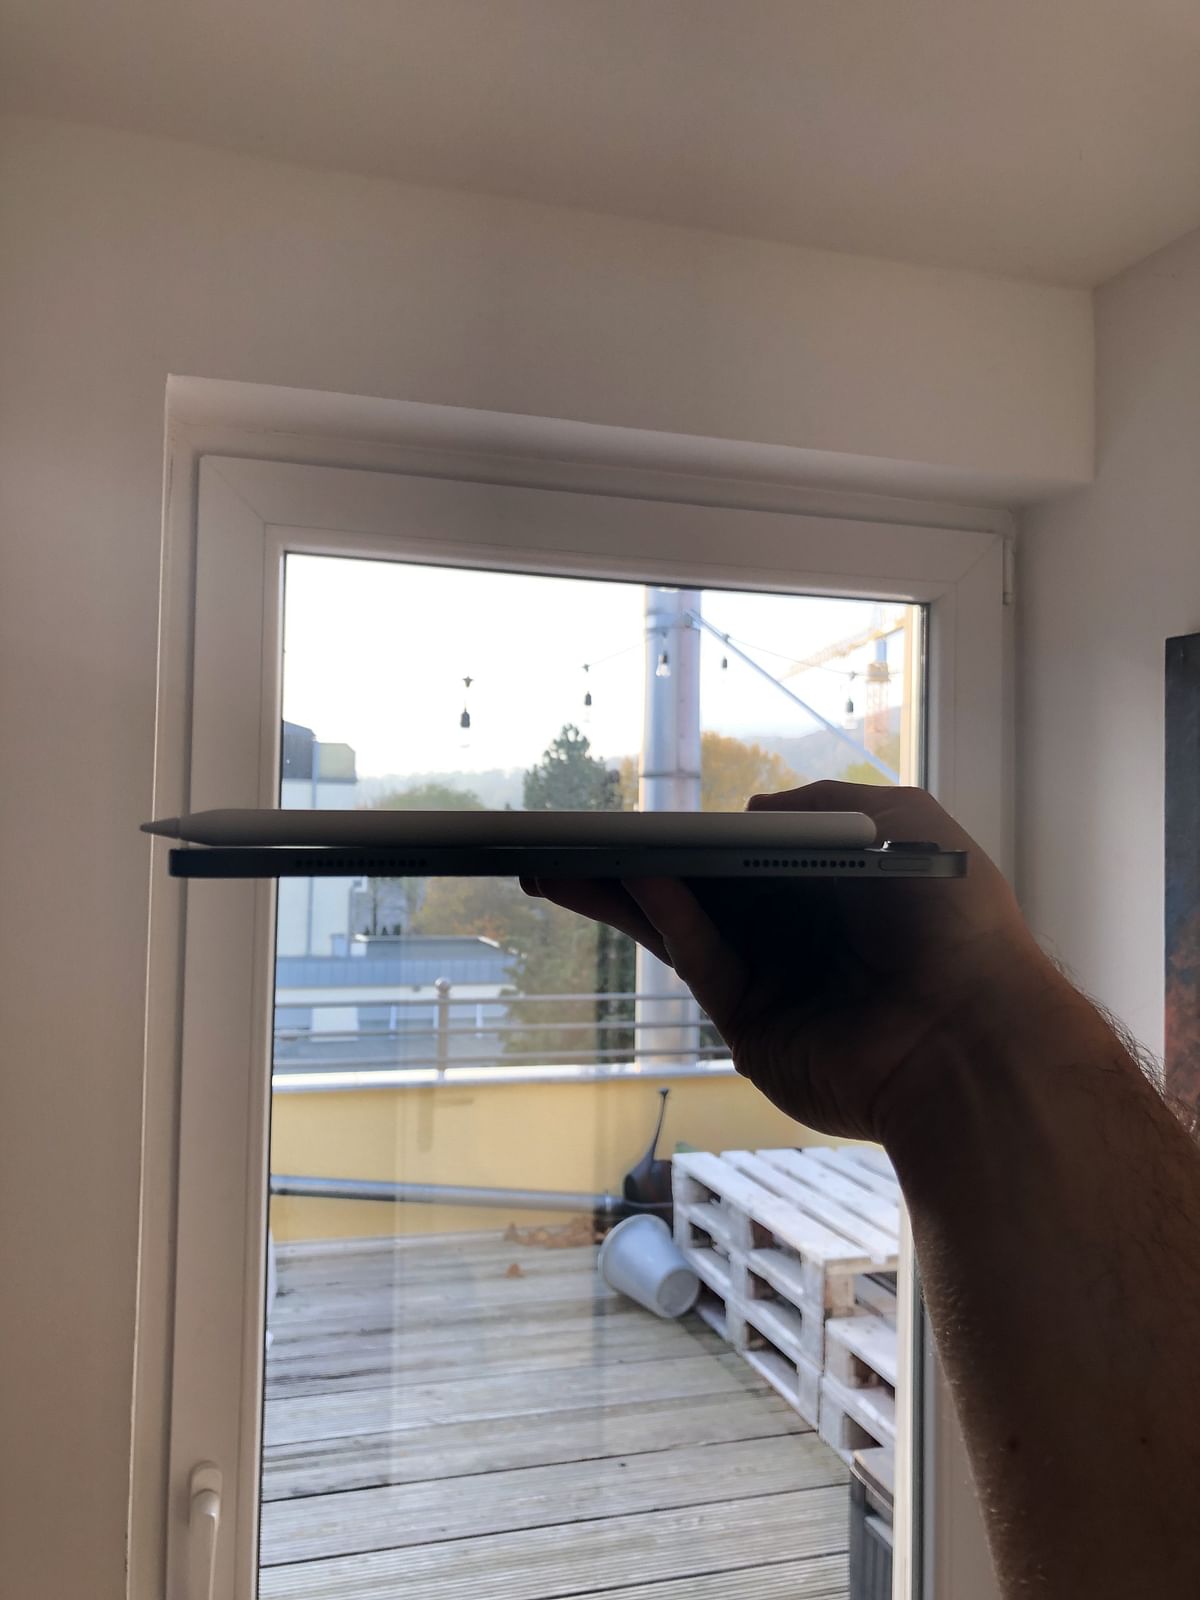 The new iPad Pro’s bending issue is either a manufacturing defect or it’s just too delicate.